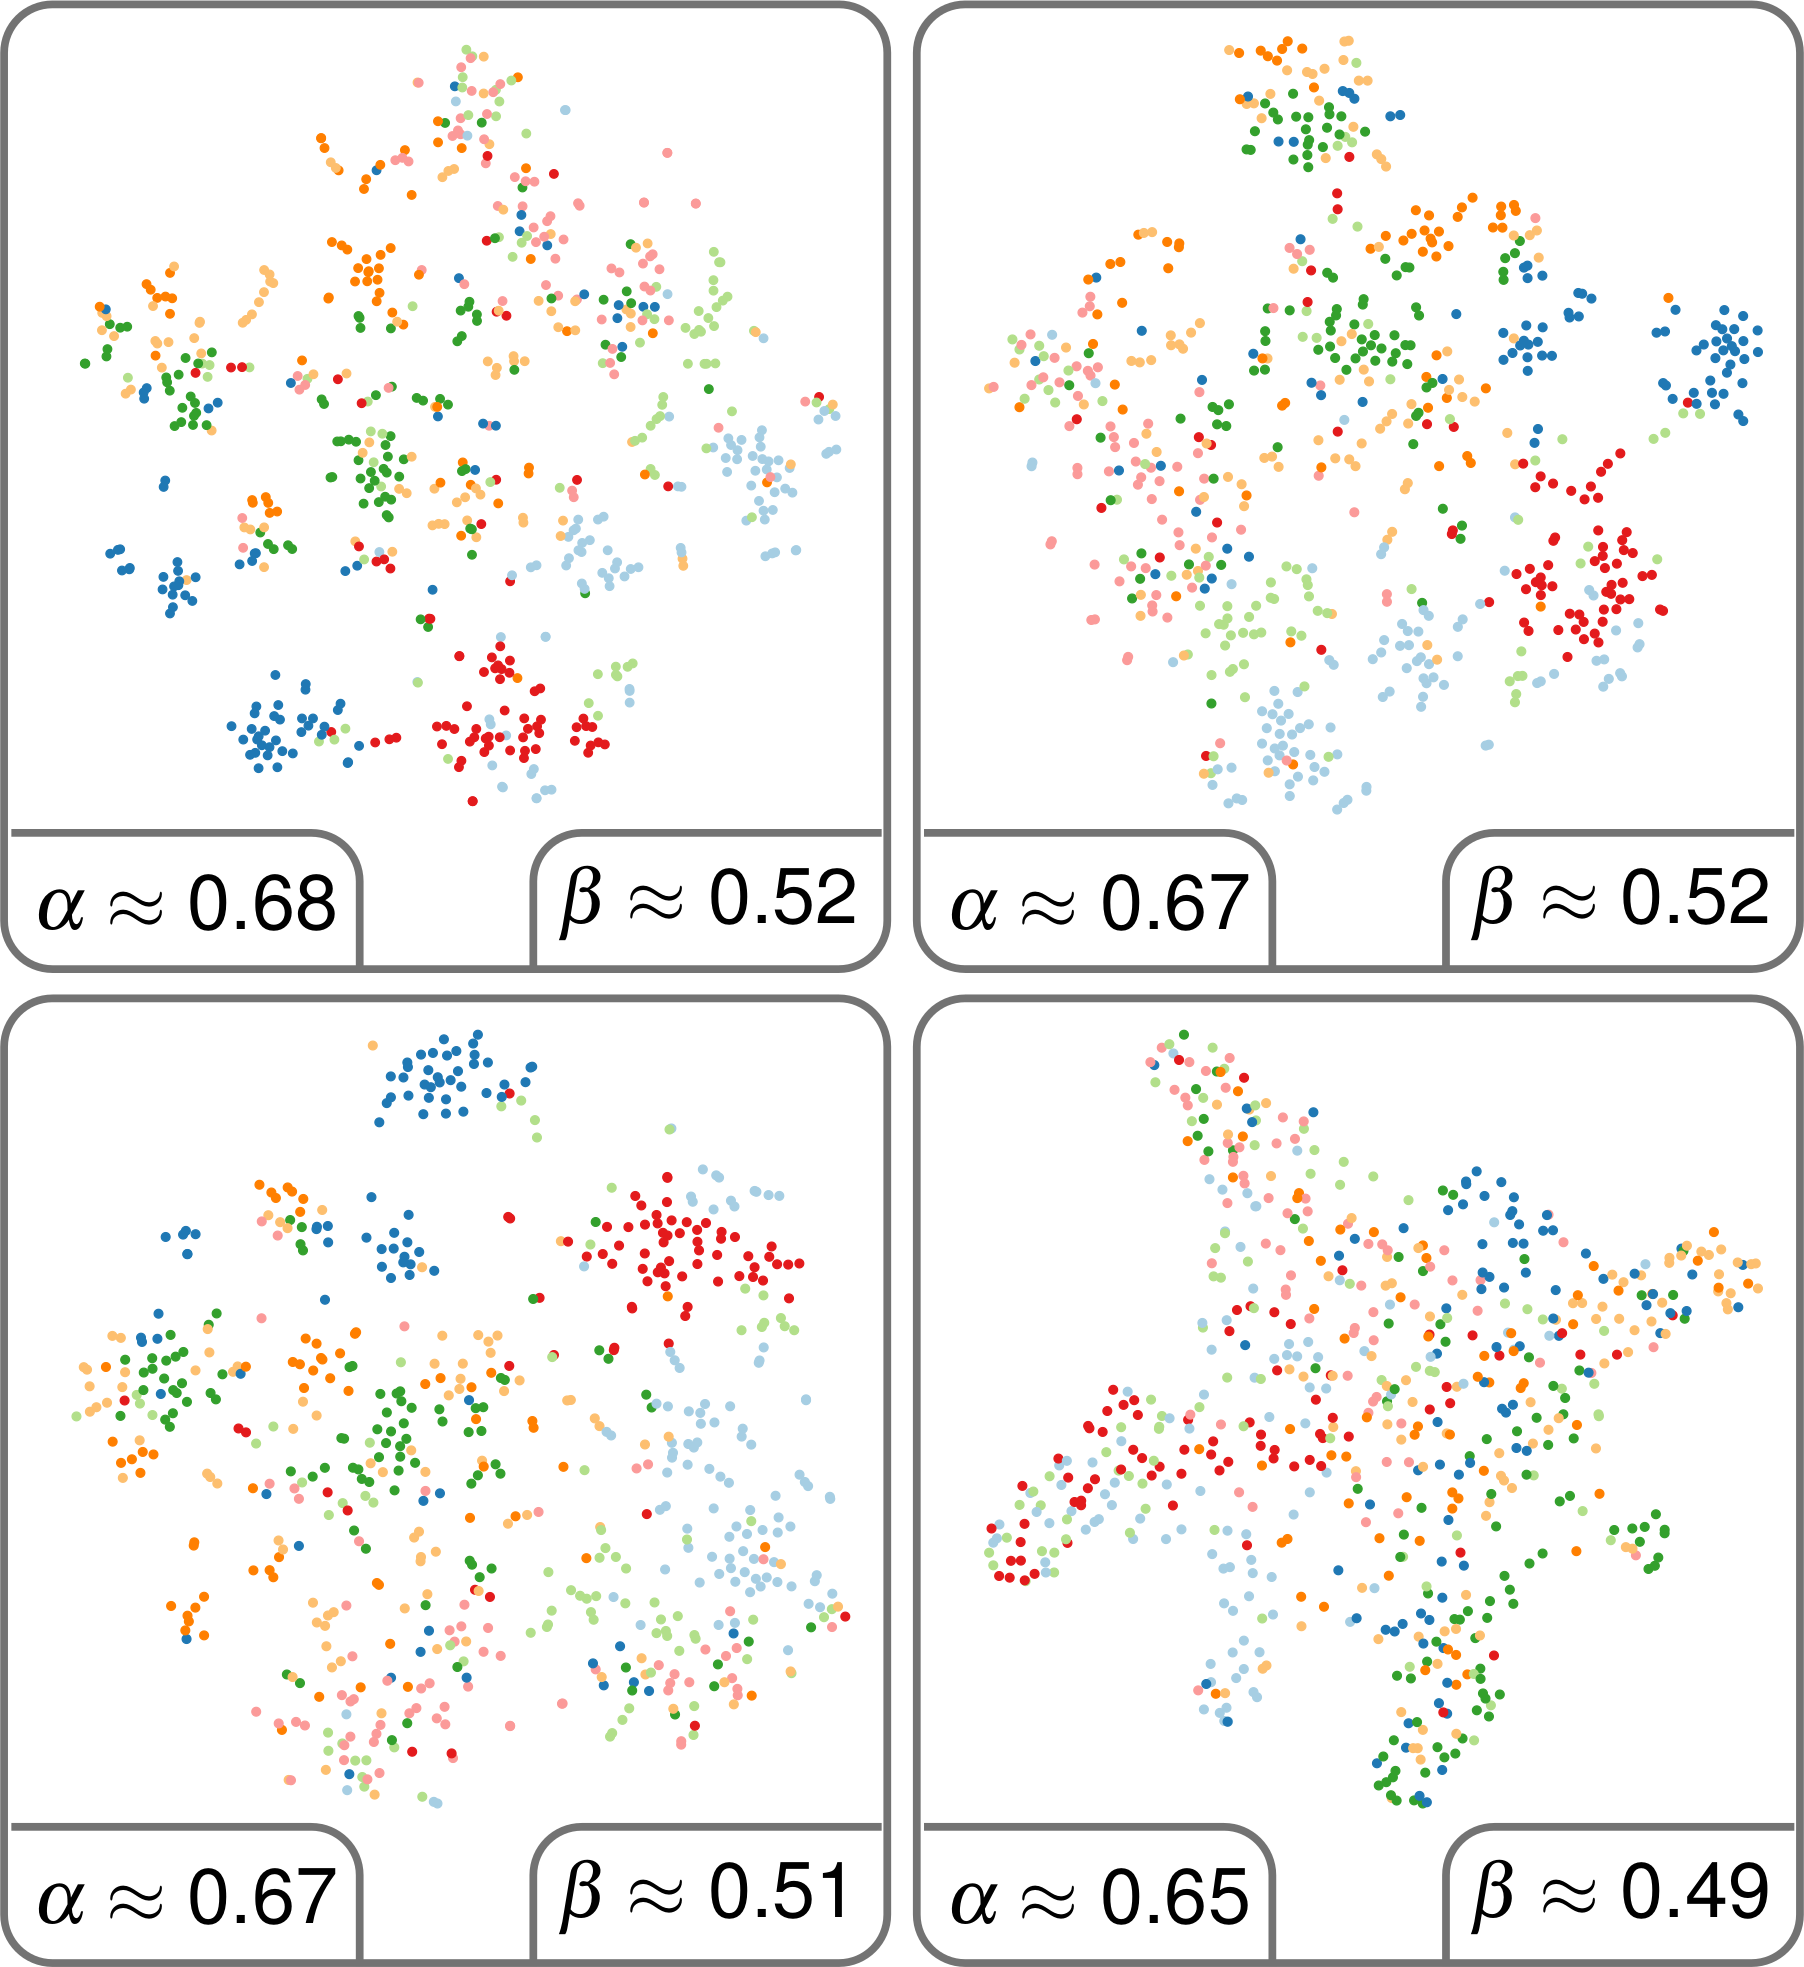 Thumbnail of Large-Scale Evaluation of Topic Models and Dimensionality Reduction Methods for 2D Text Spatialization